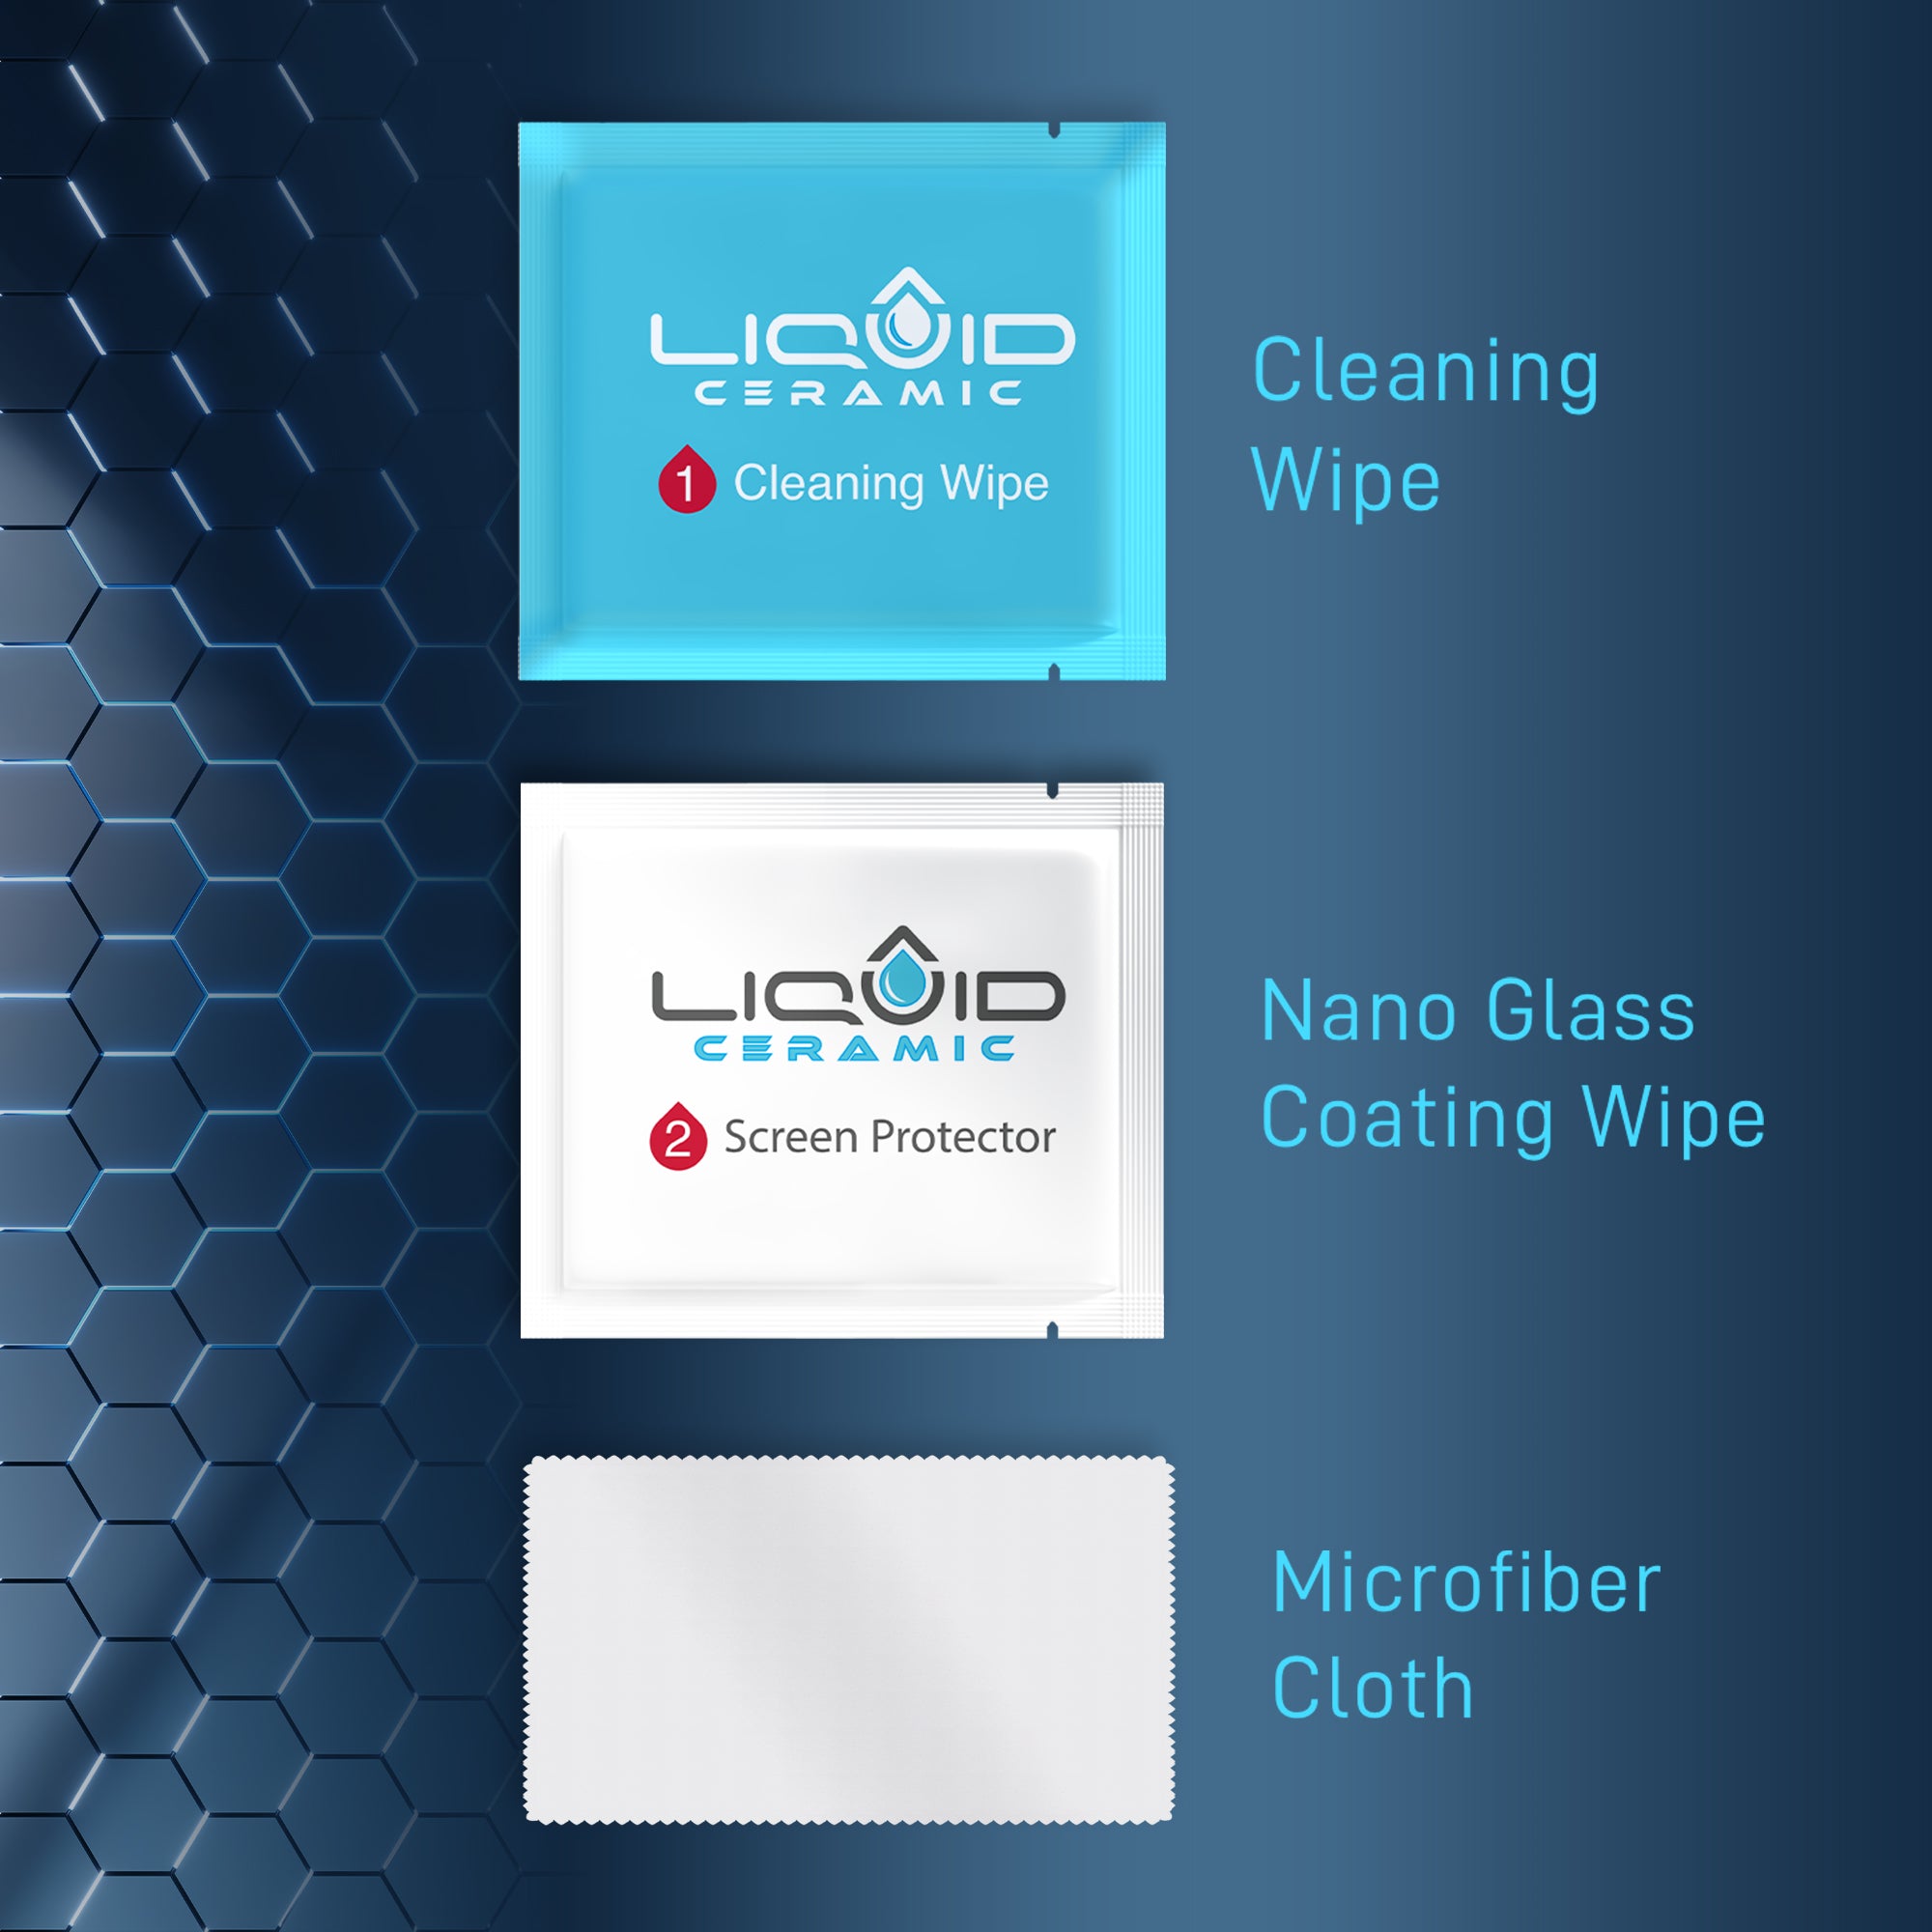 Liquid Ceramic Screen Protector with $300 Guarantee for All Phones Tablets and Smart Watches